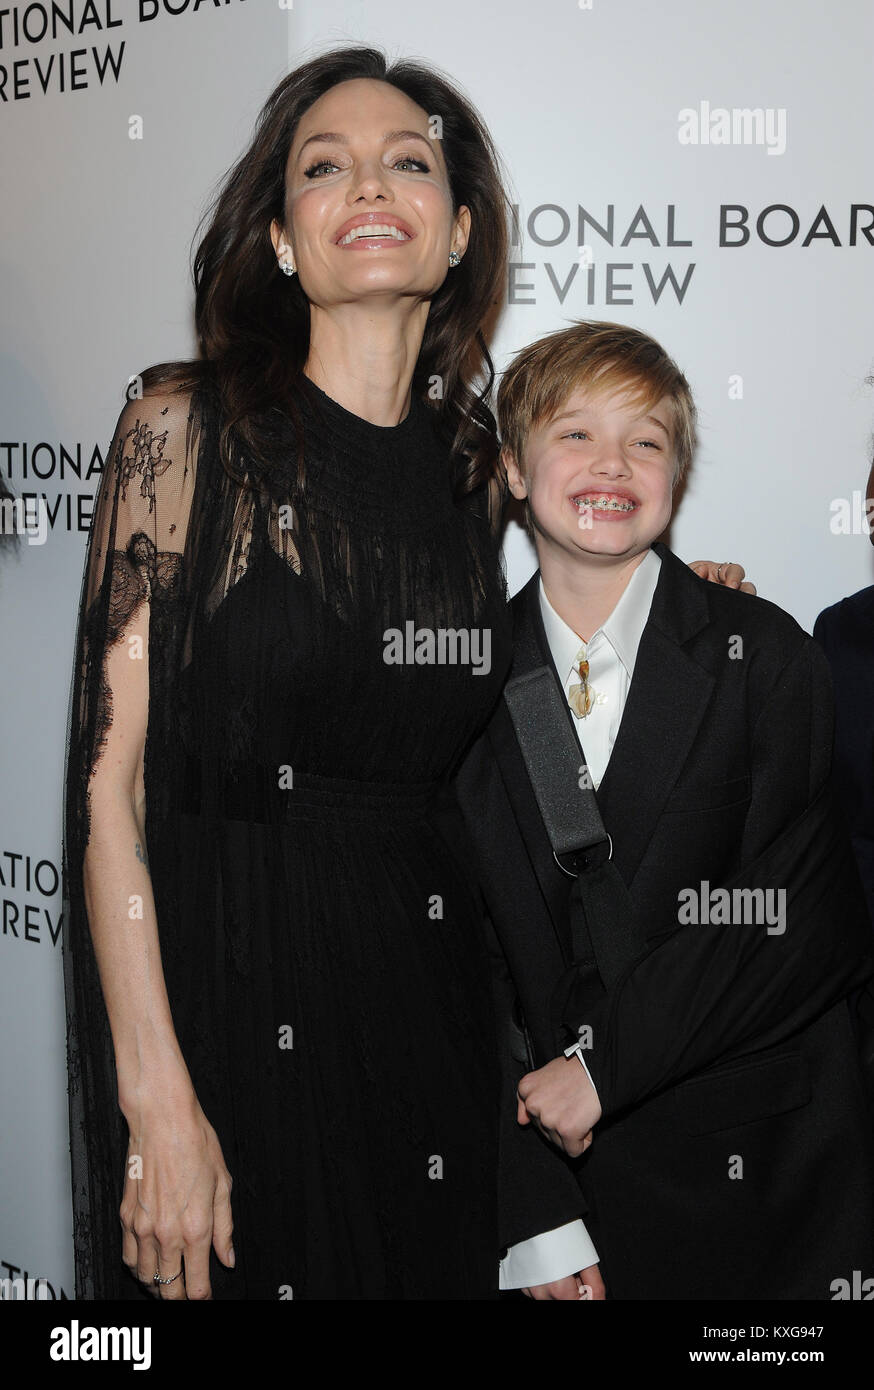 New York, NY, USA. 09th Jan, 2018. Angelina Jolie, Shiloh Jolie-Pitt, attends the 2018 National Board Of Review Awards Gala at Cipriani 42nd Street on January 9, 2018 in New York City. Credit: John Palmer/Media Punch/Alamy Live News Stock Photo